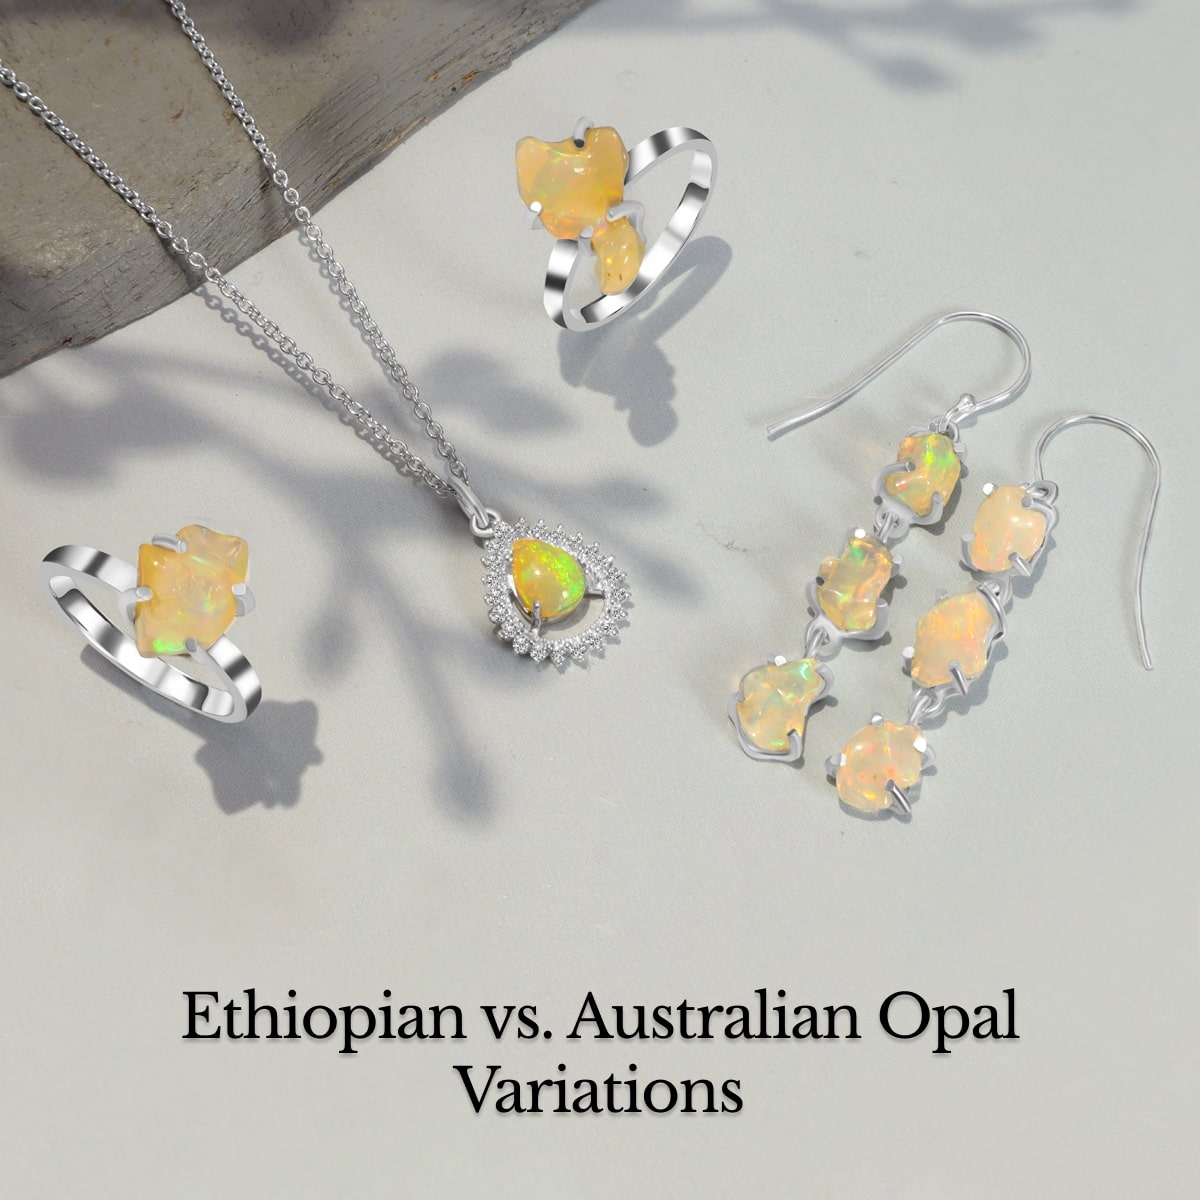 Differences Between Ethiopian opal and Australian opal